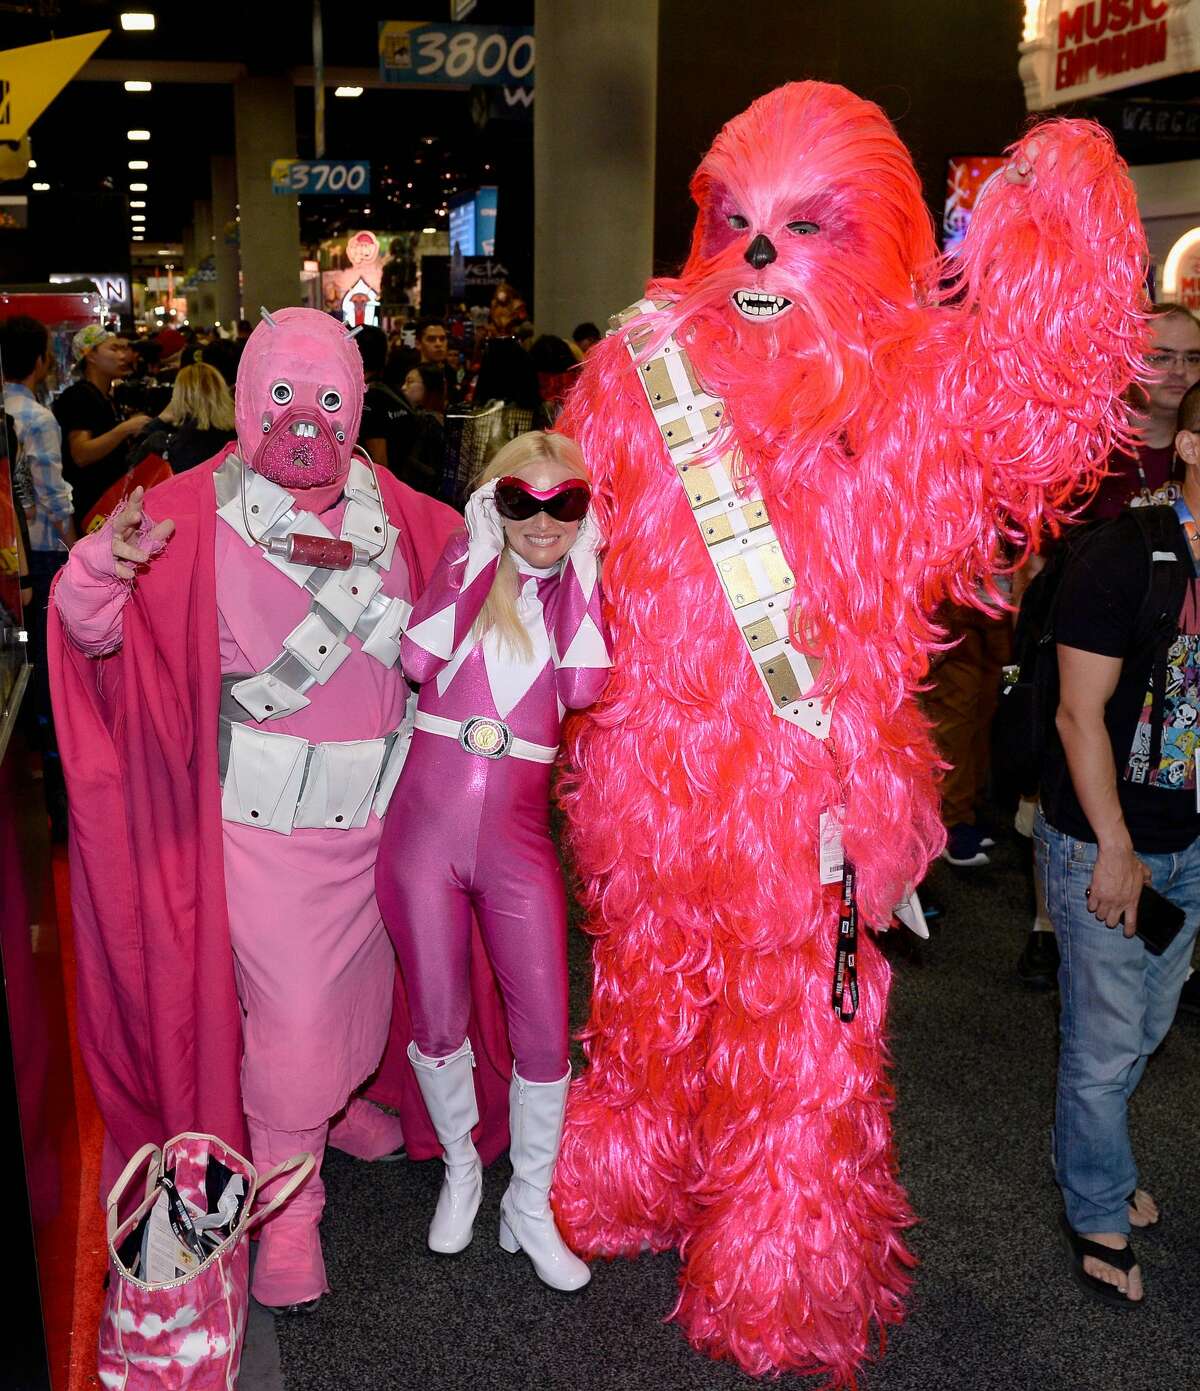 Hottest cosplay costumes from San Diego Comic-Con 2016